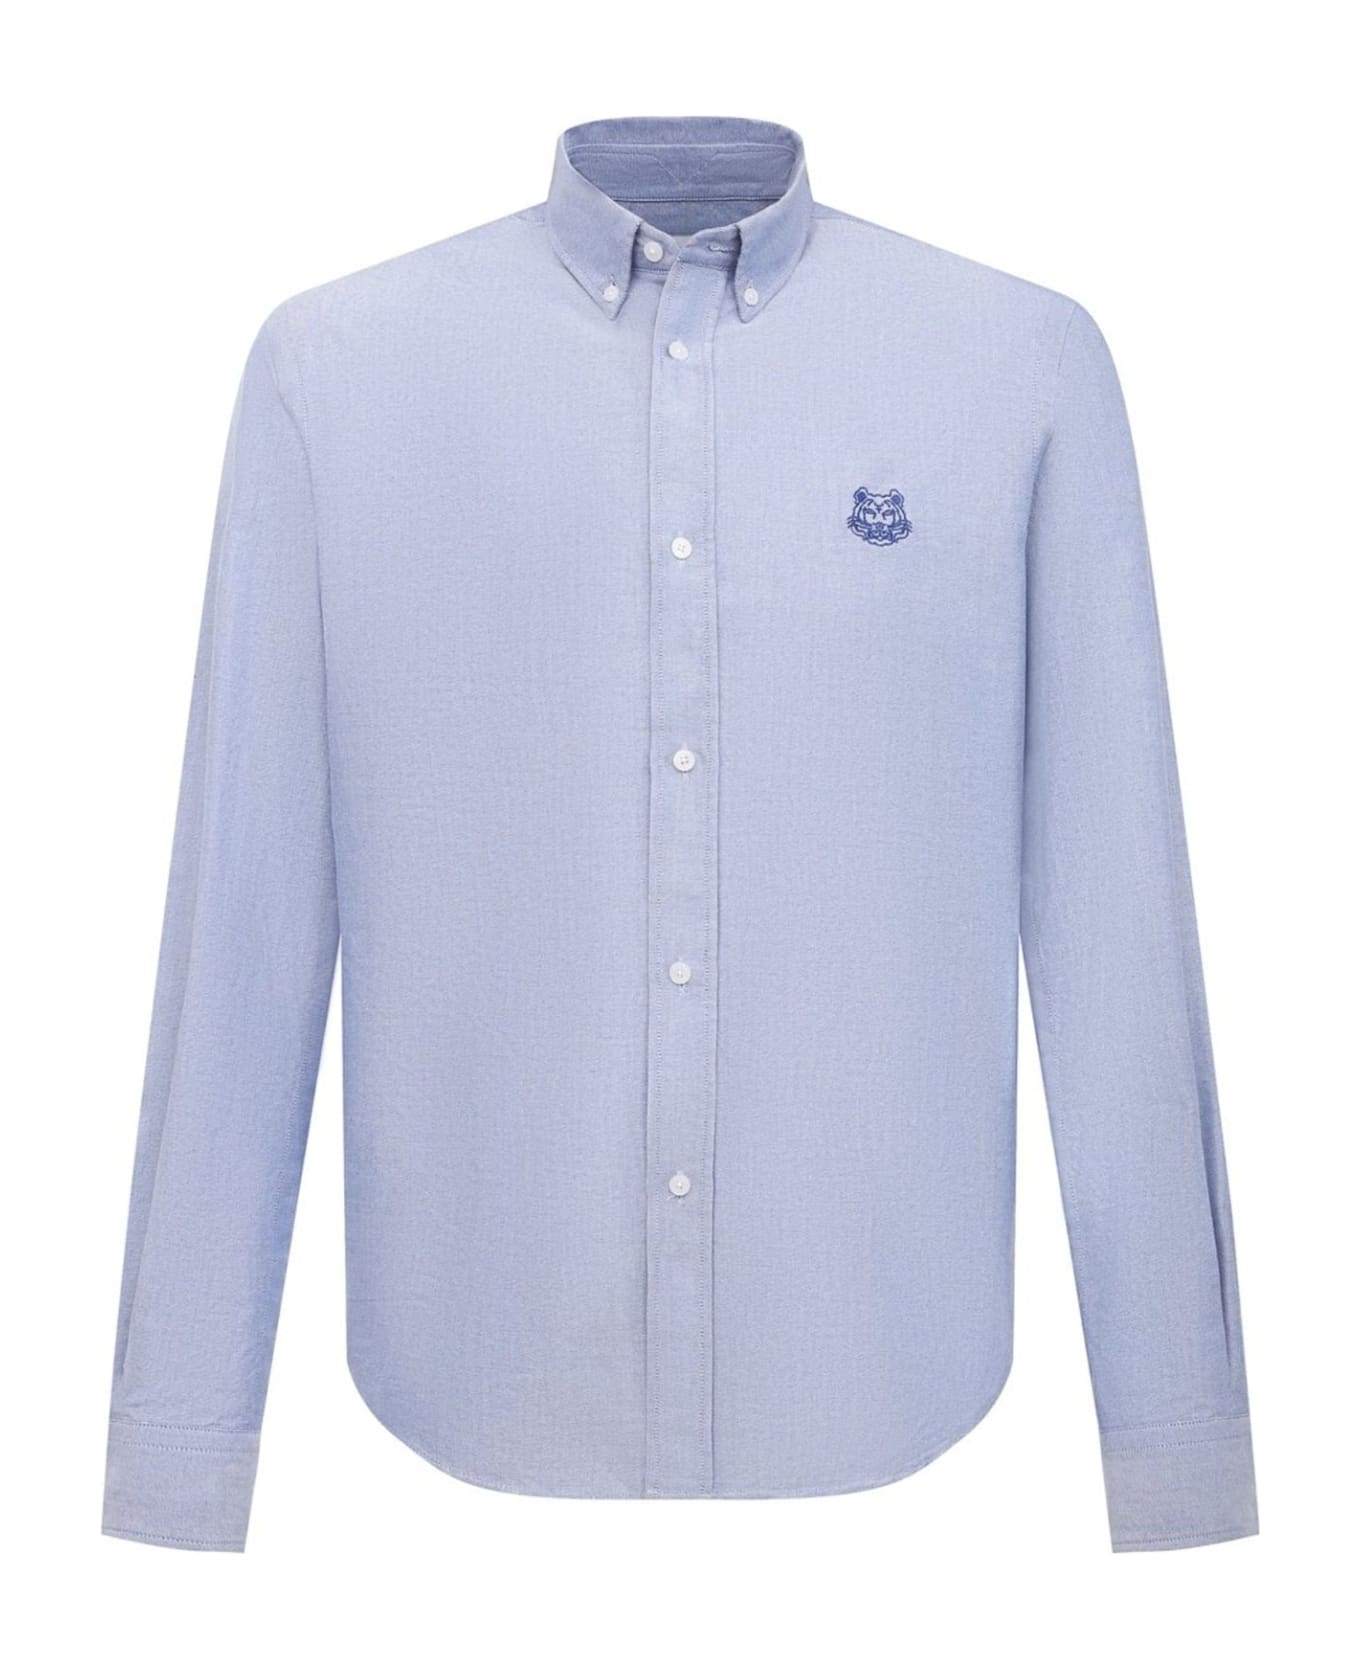 Kenzo Tiger Embroidered Shirt - Blue シャツ